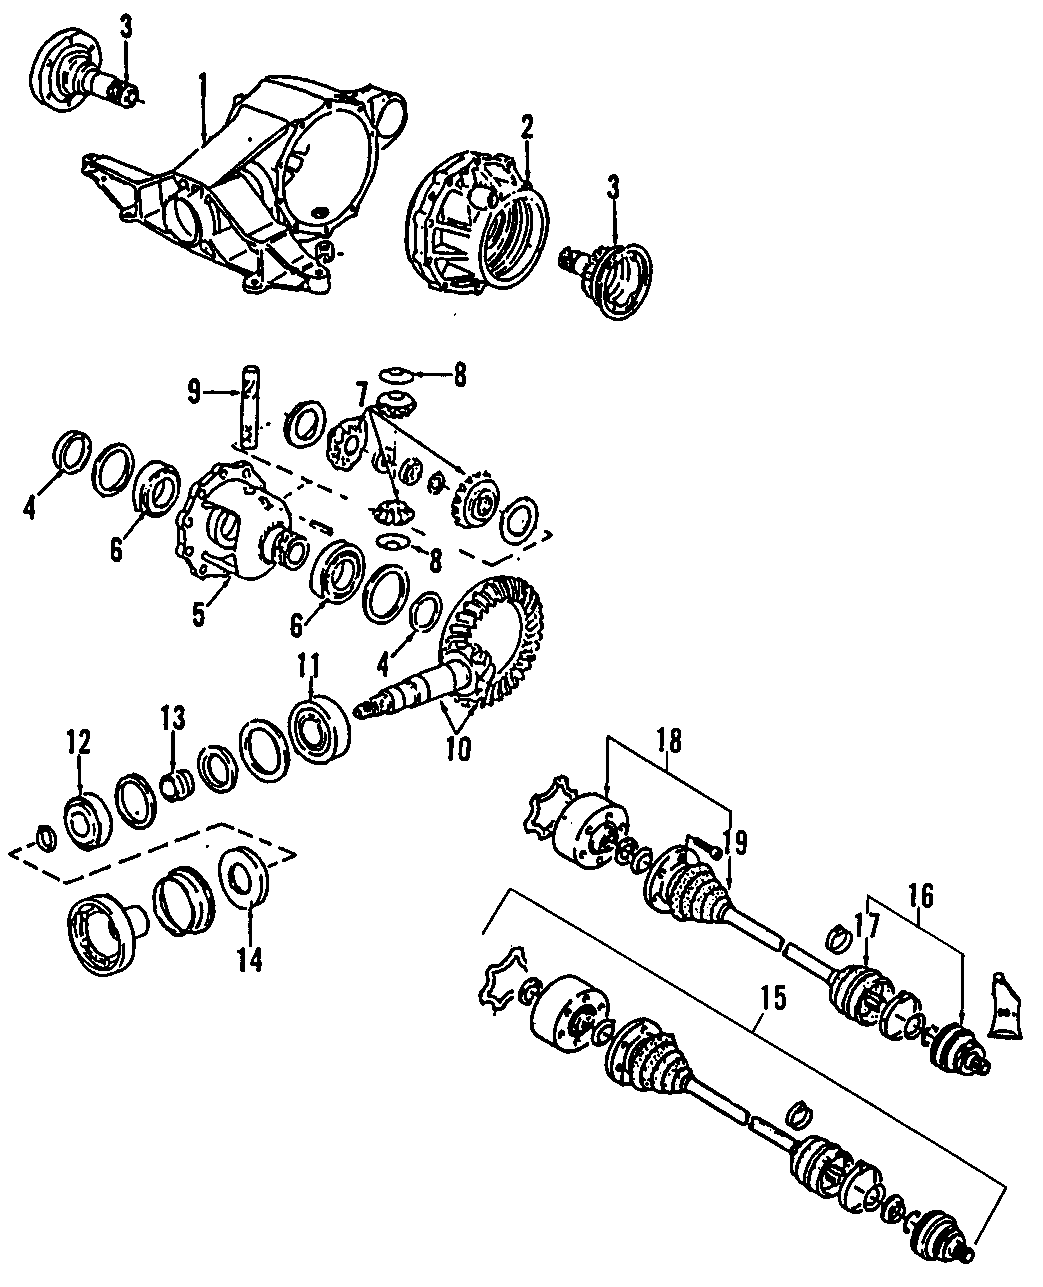 15DRIVE AXLES. REAR AXLE. AXLE SHAFTS & JOINTS. DIFFERENTIAL. PROPELLER SHAFT.https://images.simplepart.com/images/parts/motor/fullsize/F207090.png